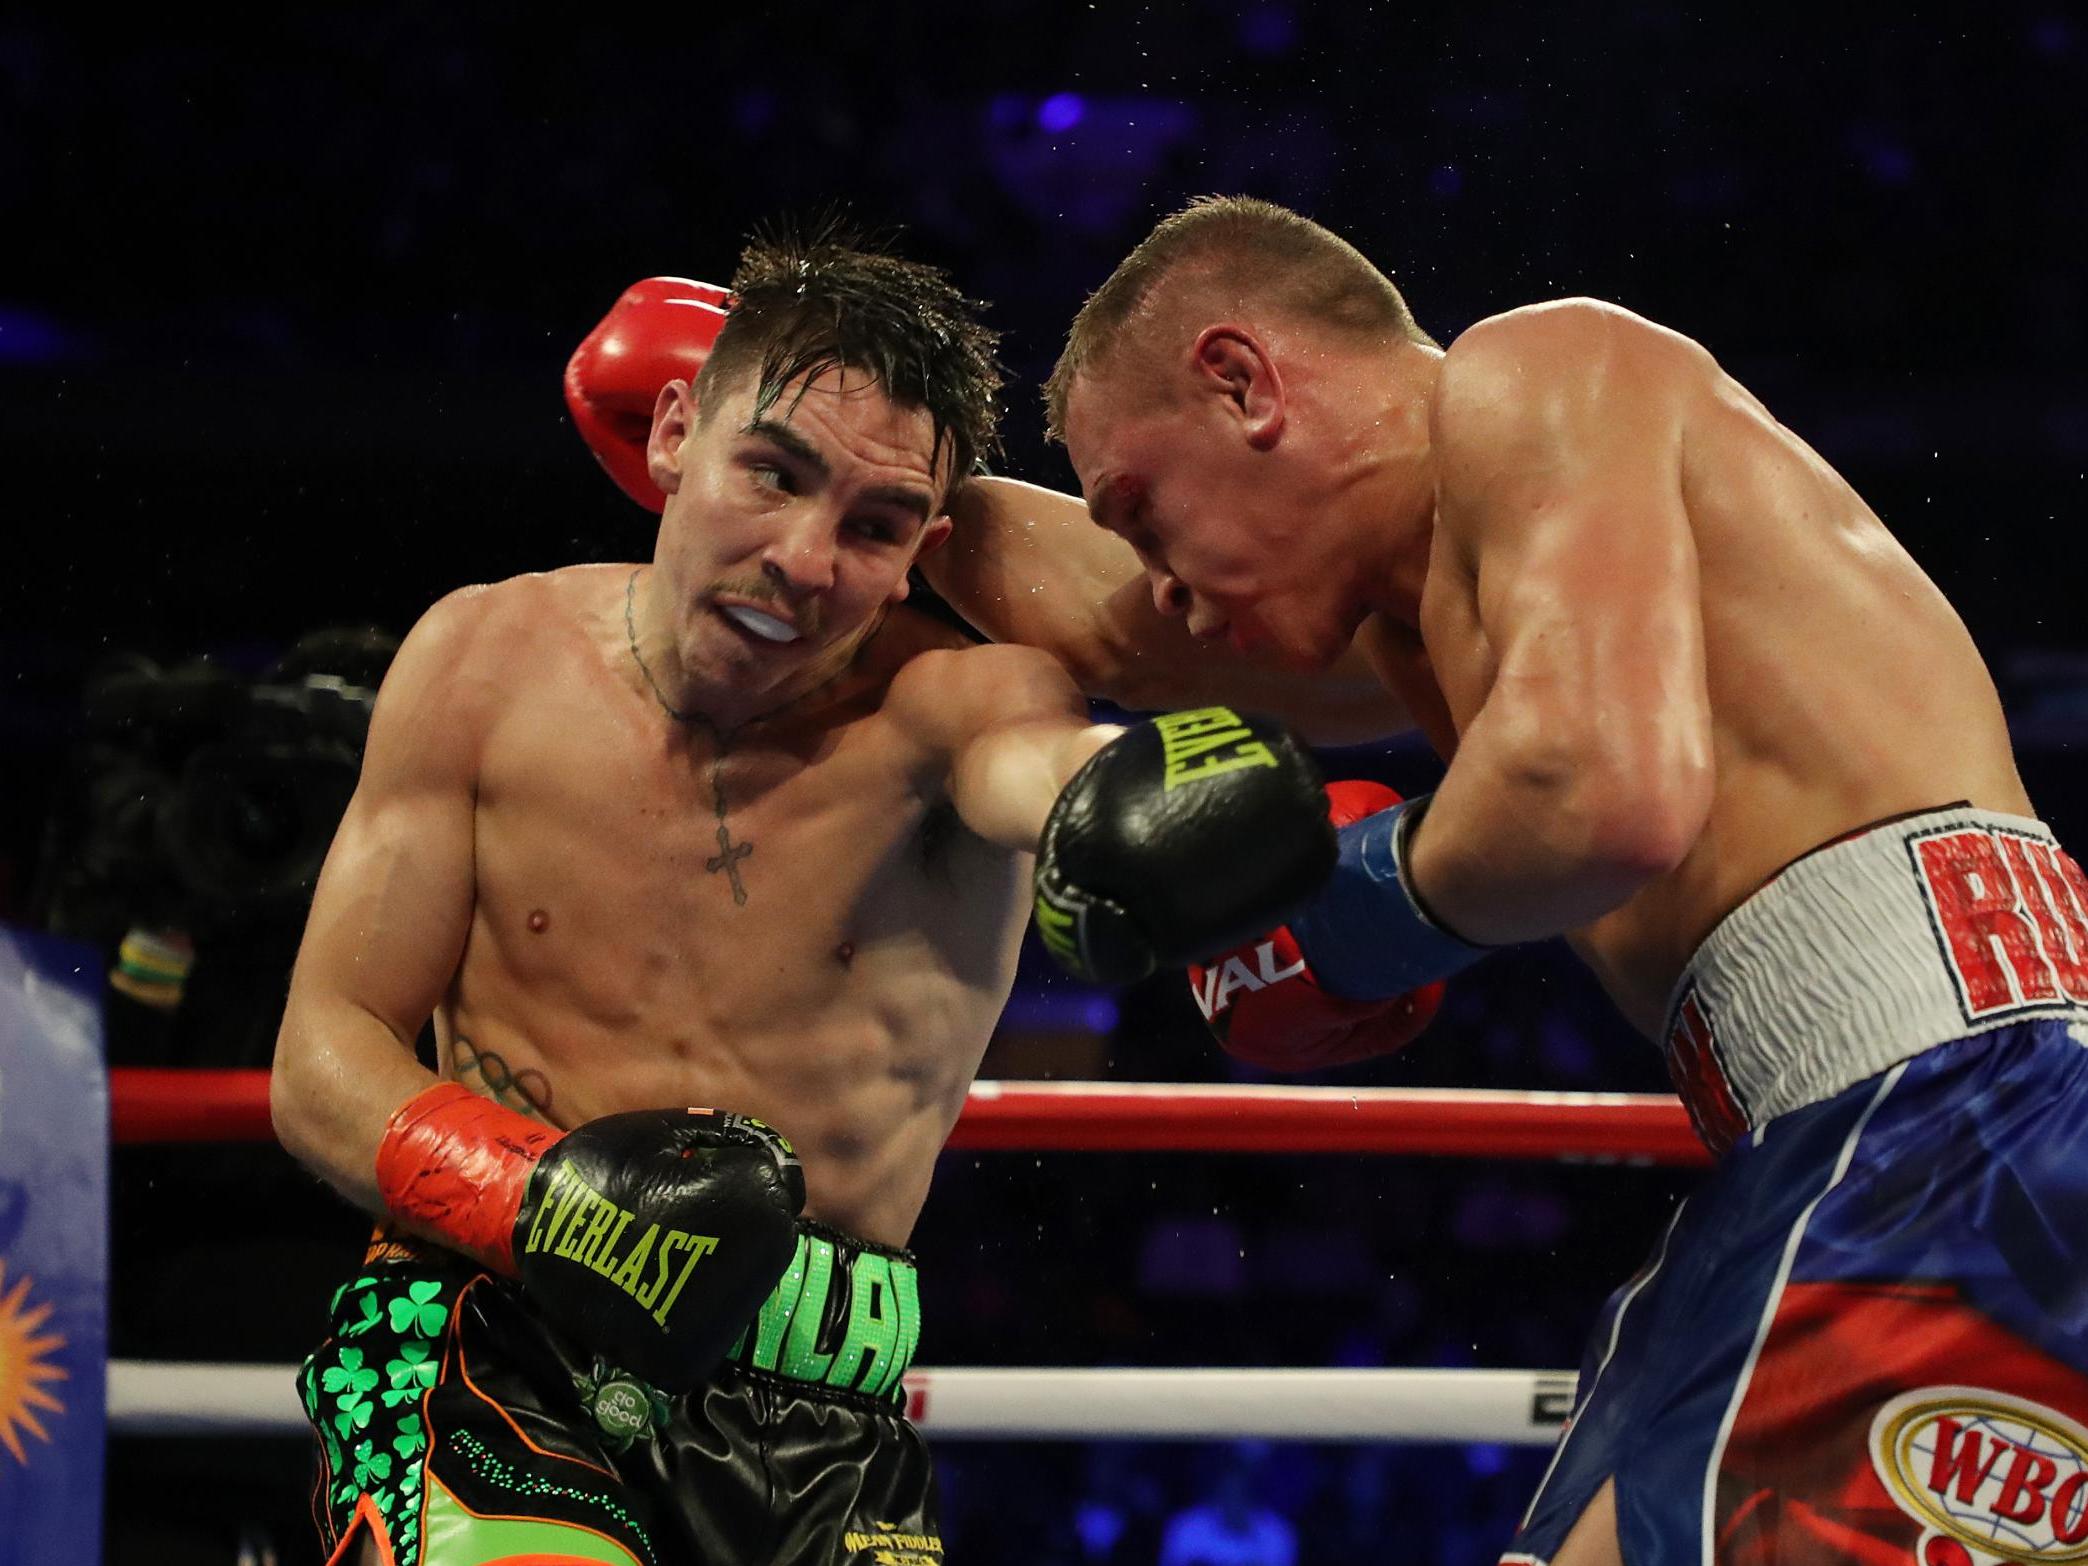 Michael Conlan is returning to Belfast due to his fight being postponed